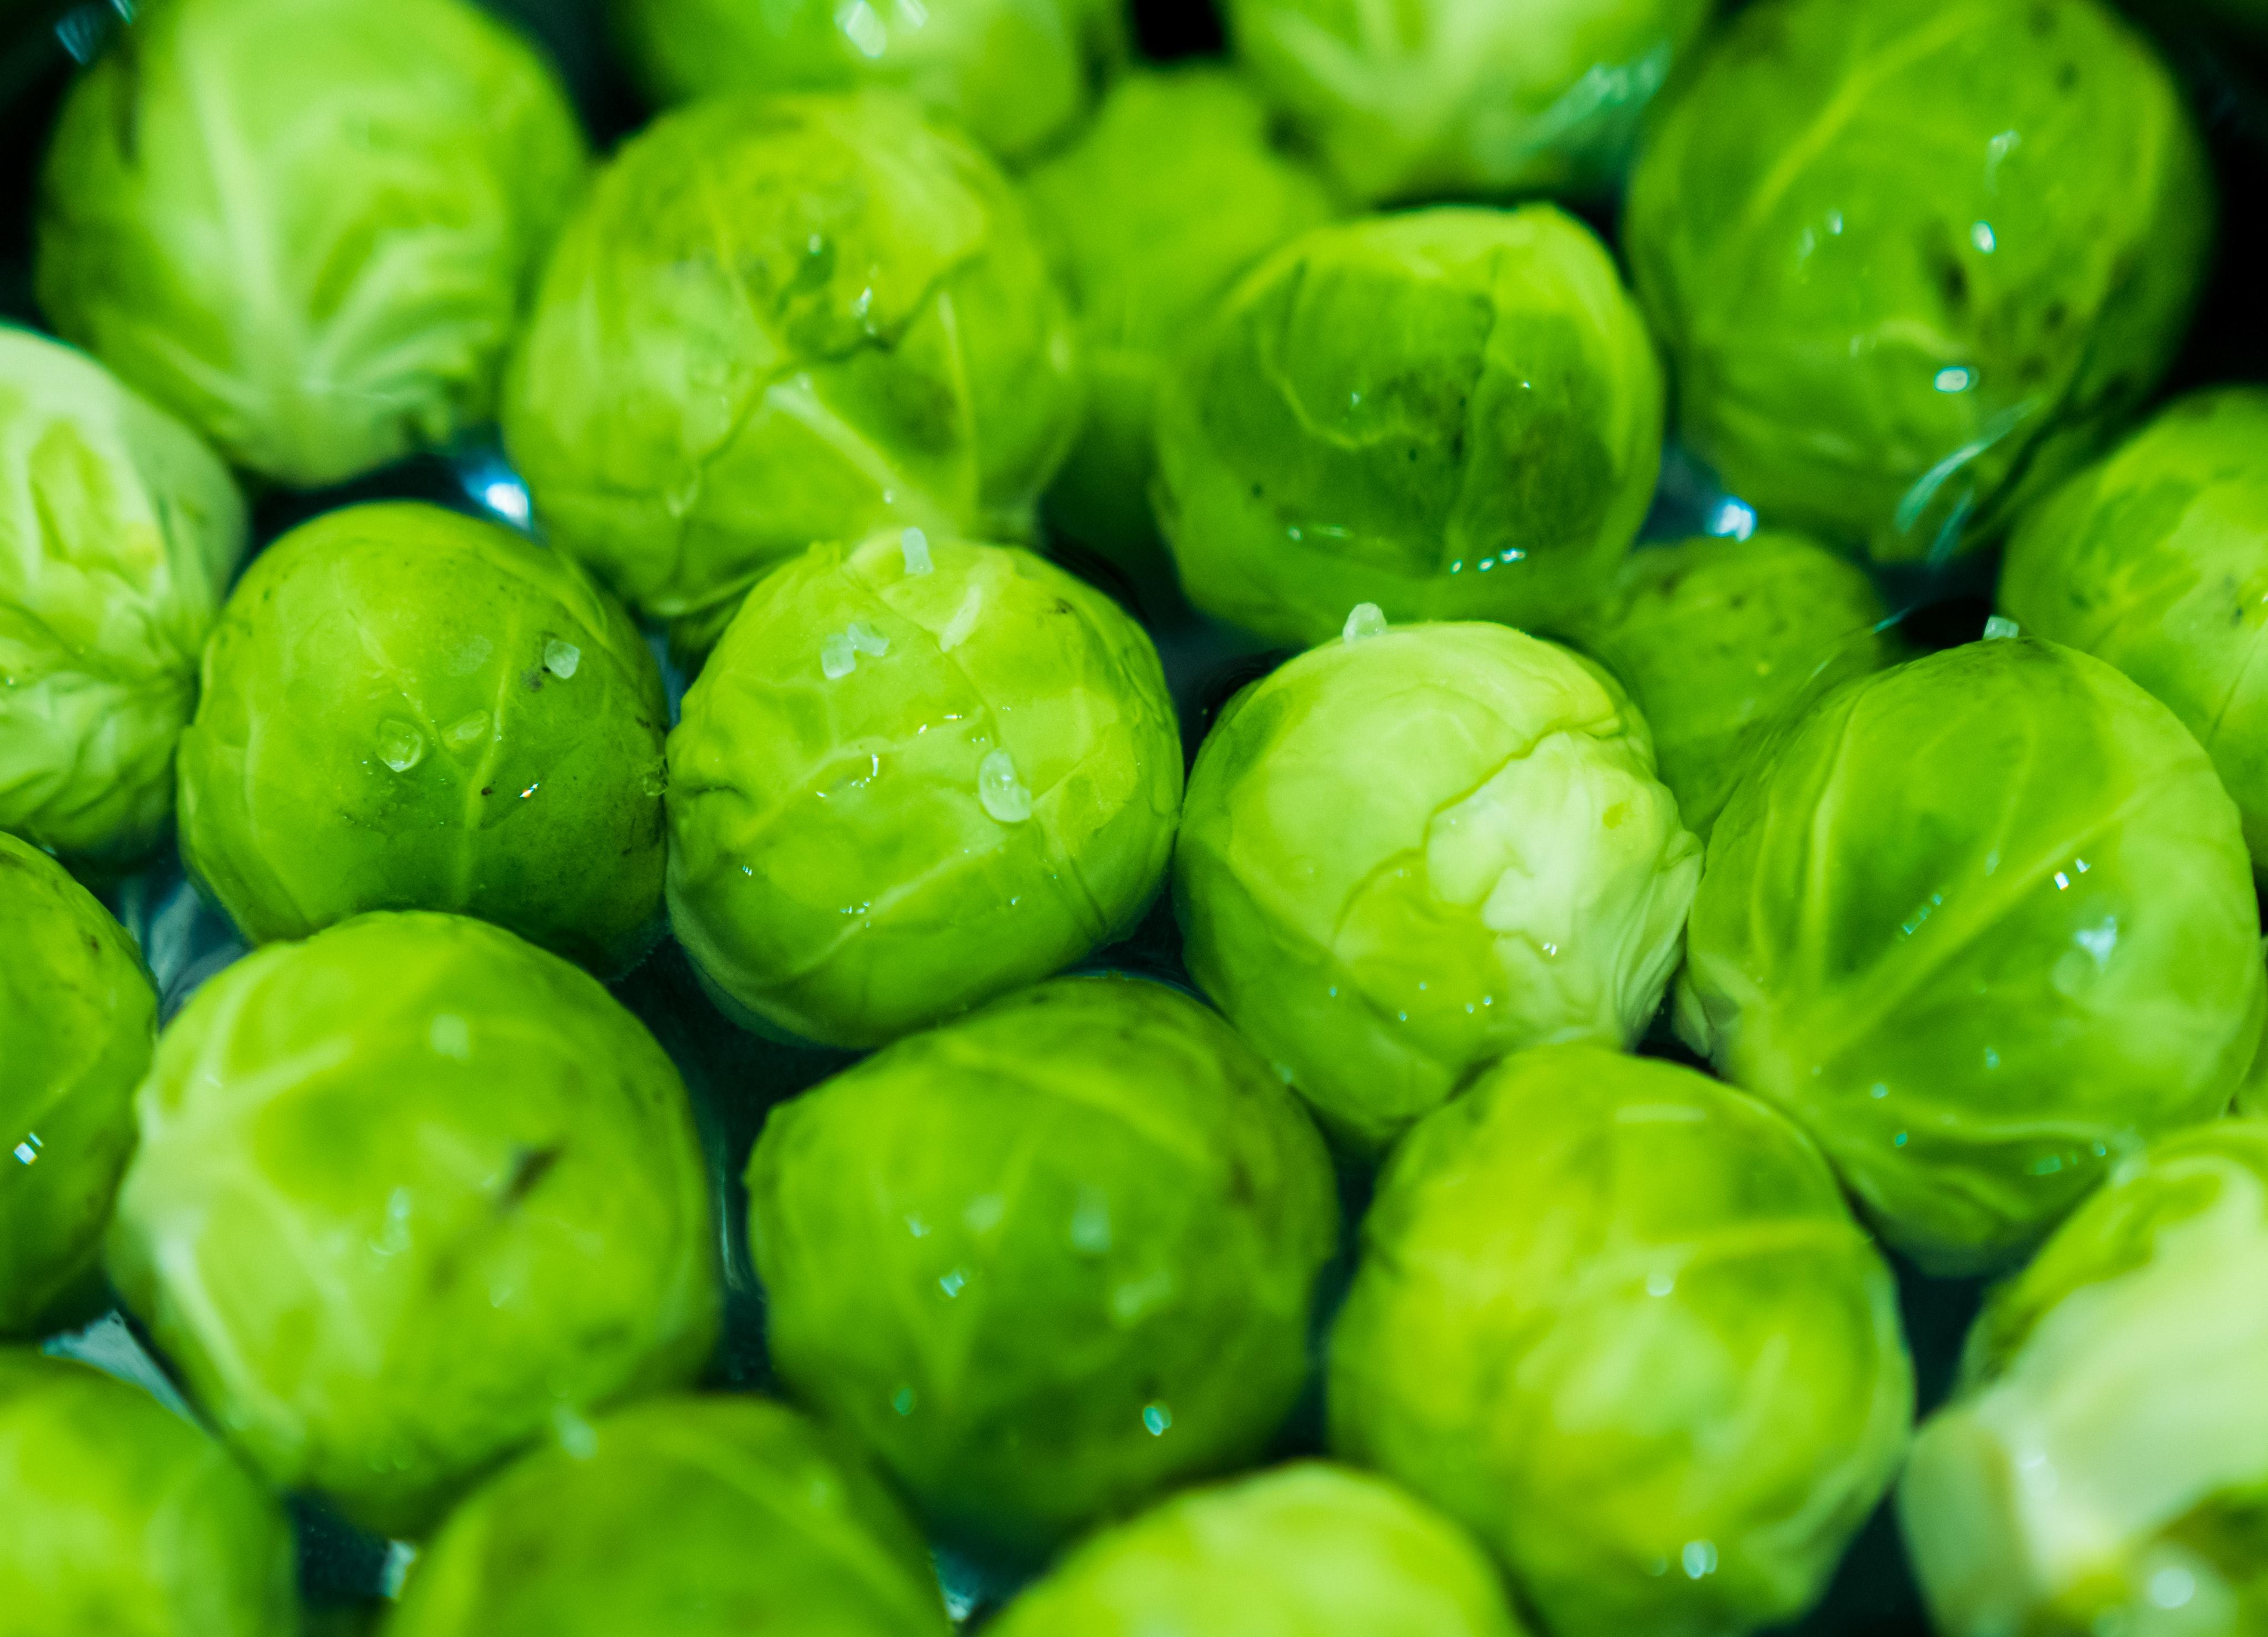 How To Grow Brussel Sprouts From Scraps 